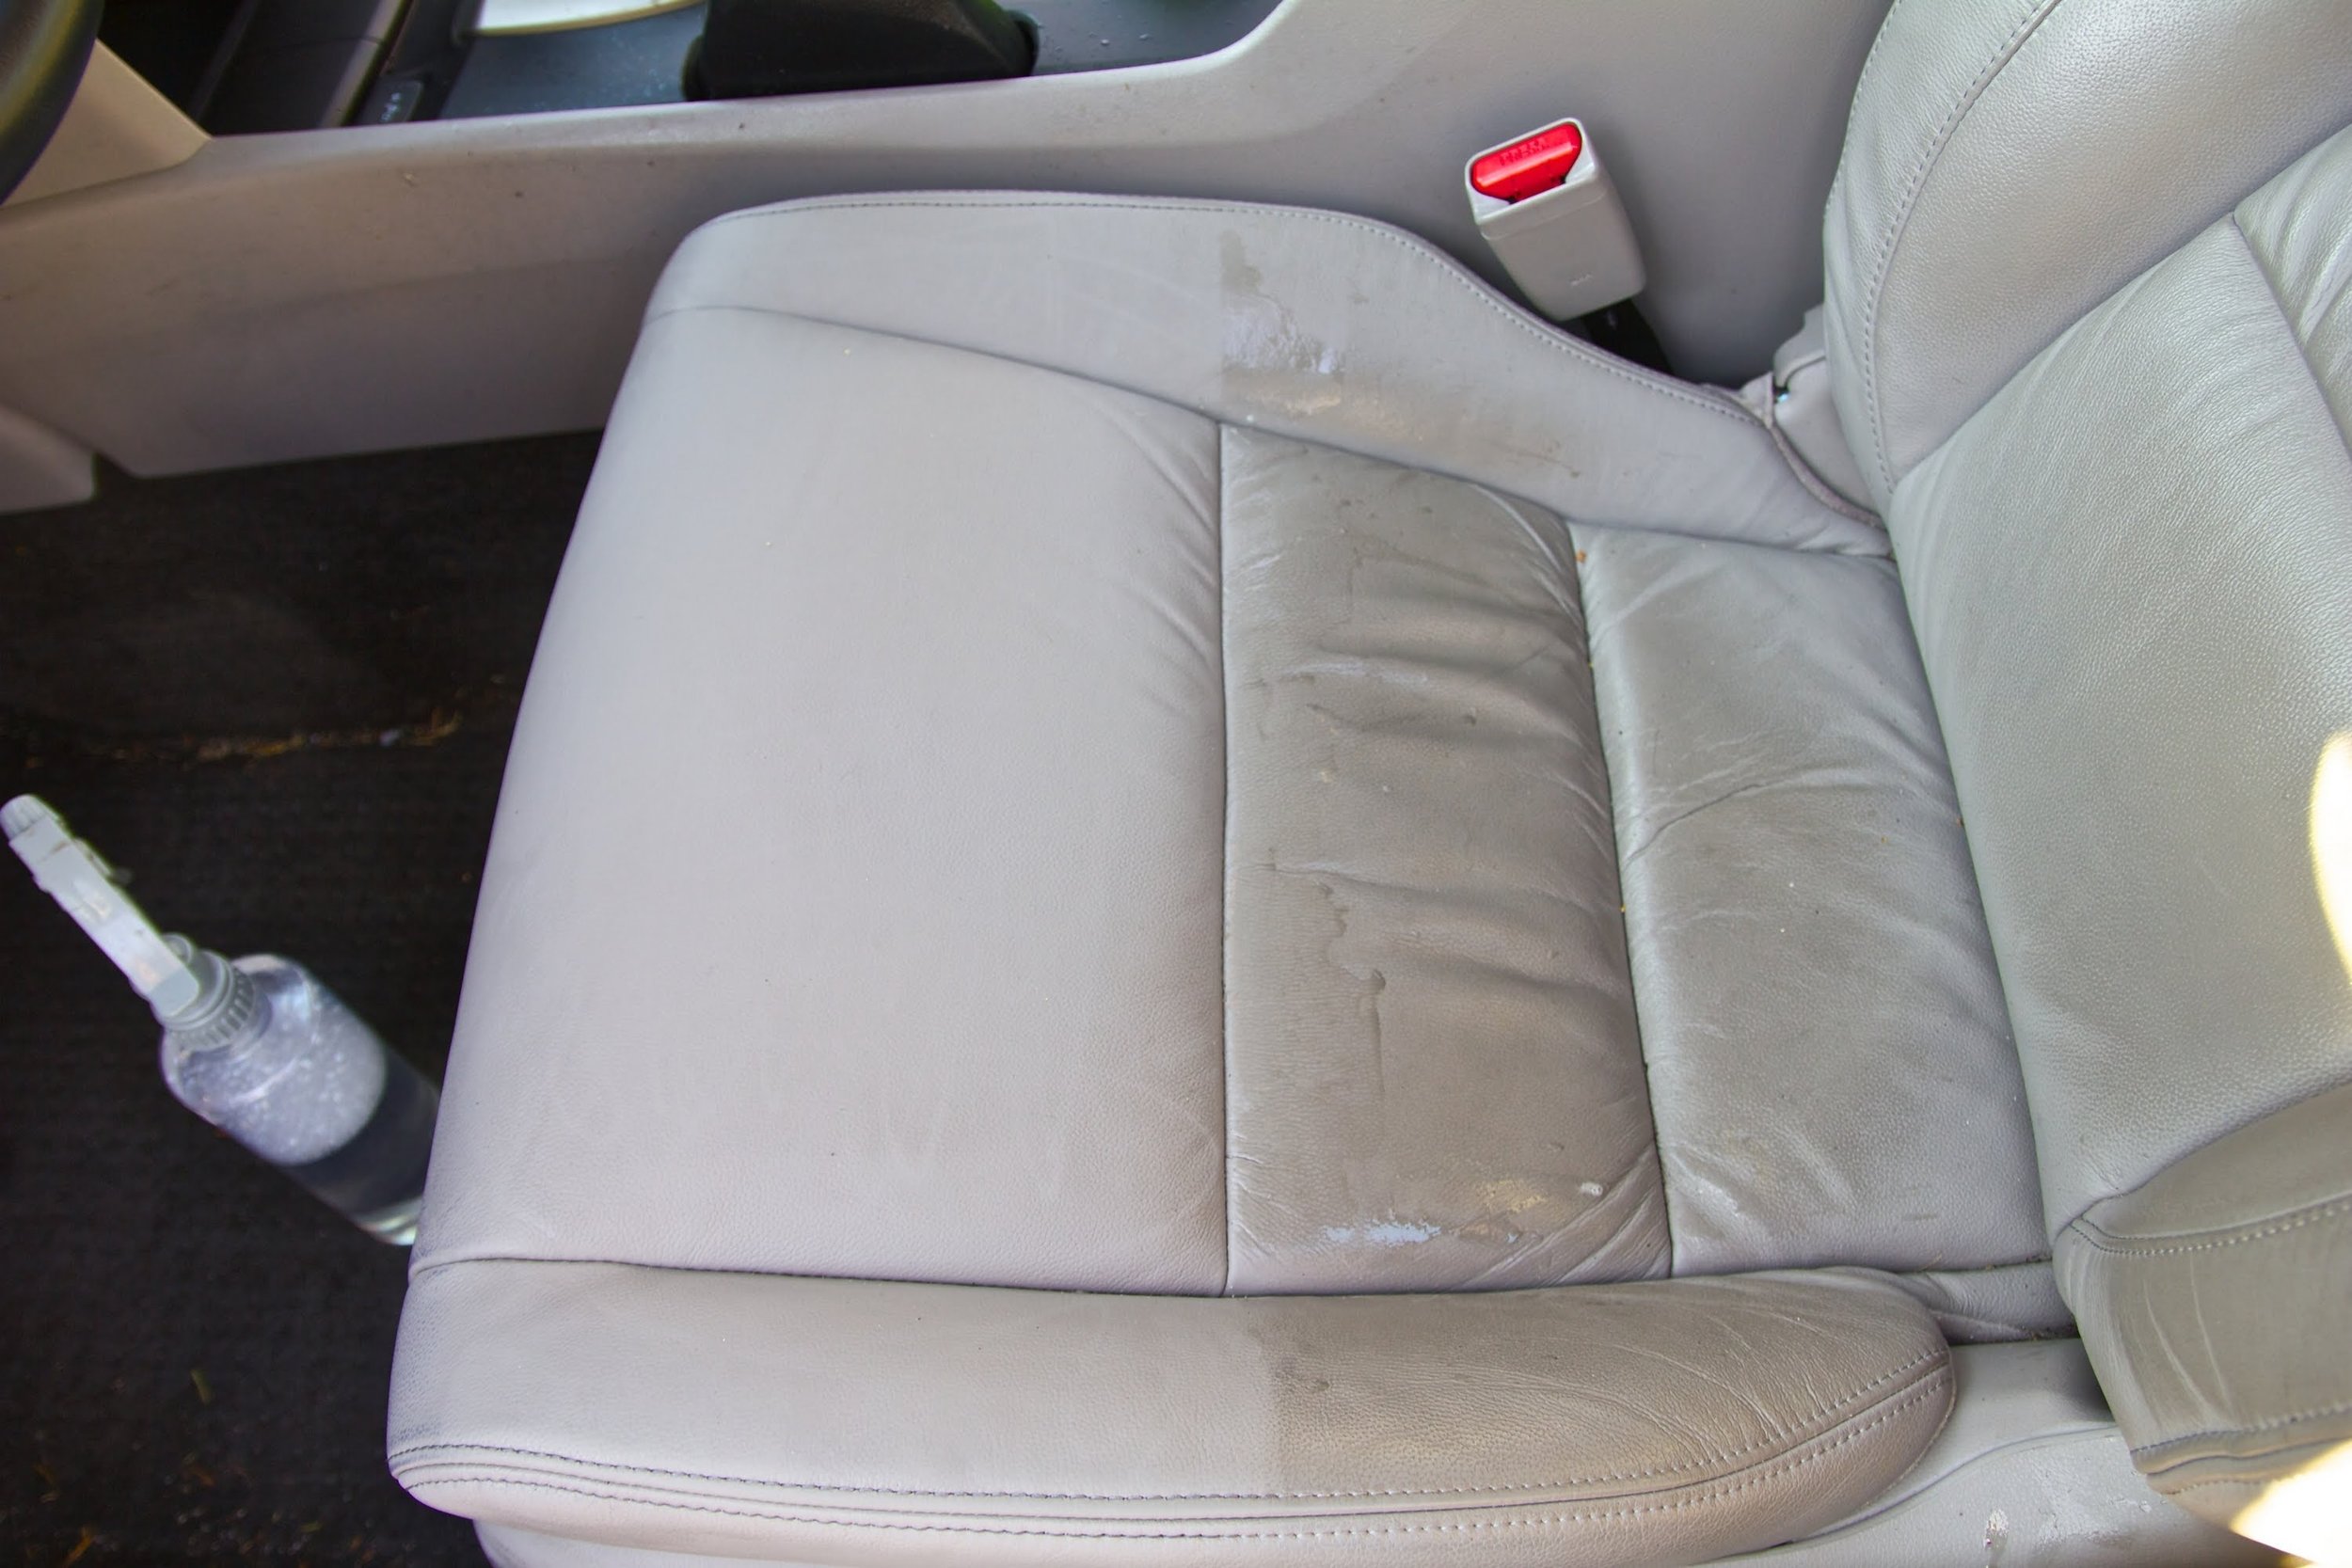 Mobile Car Detailing Winston M Nc How To Clean Condition Leather Seats Guide - Best Leather Cleaner And Protector For Car Seats